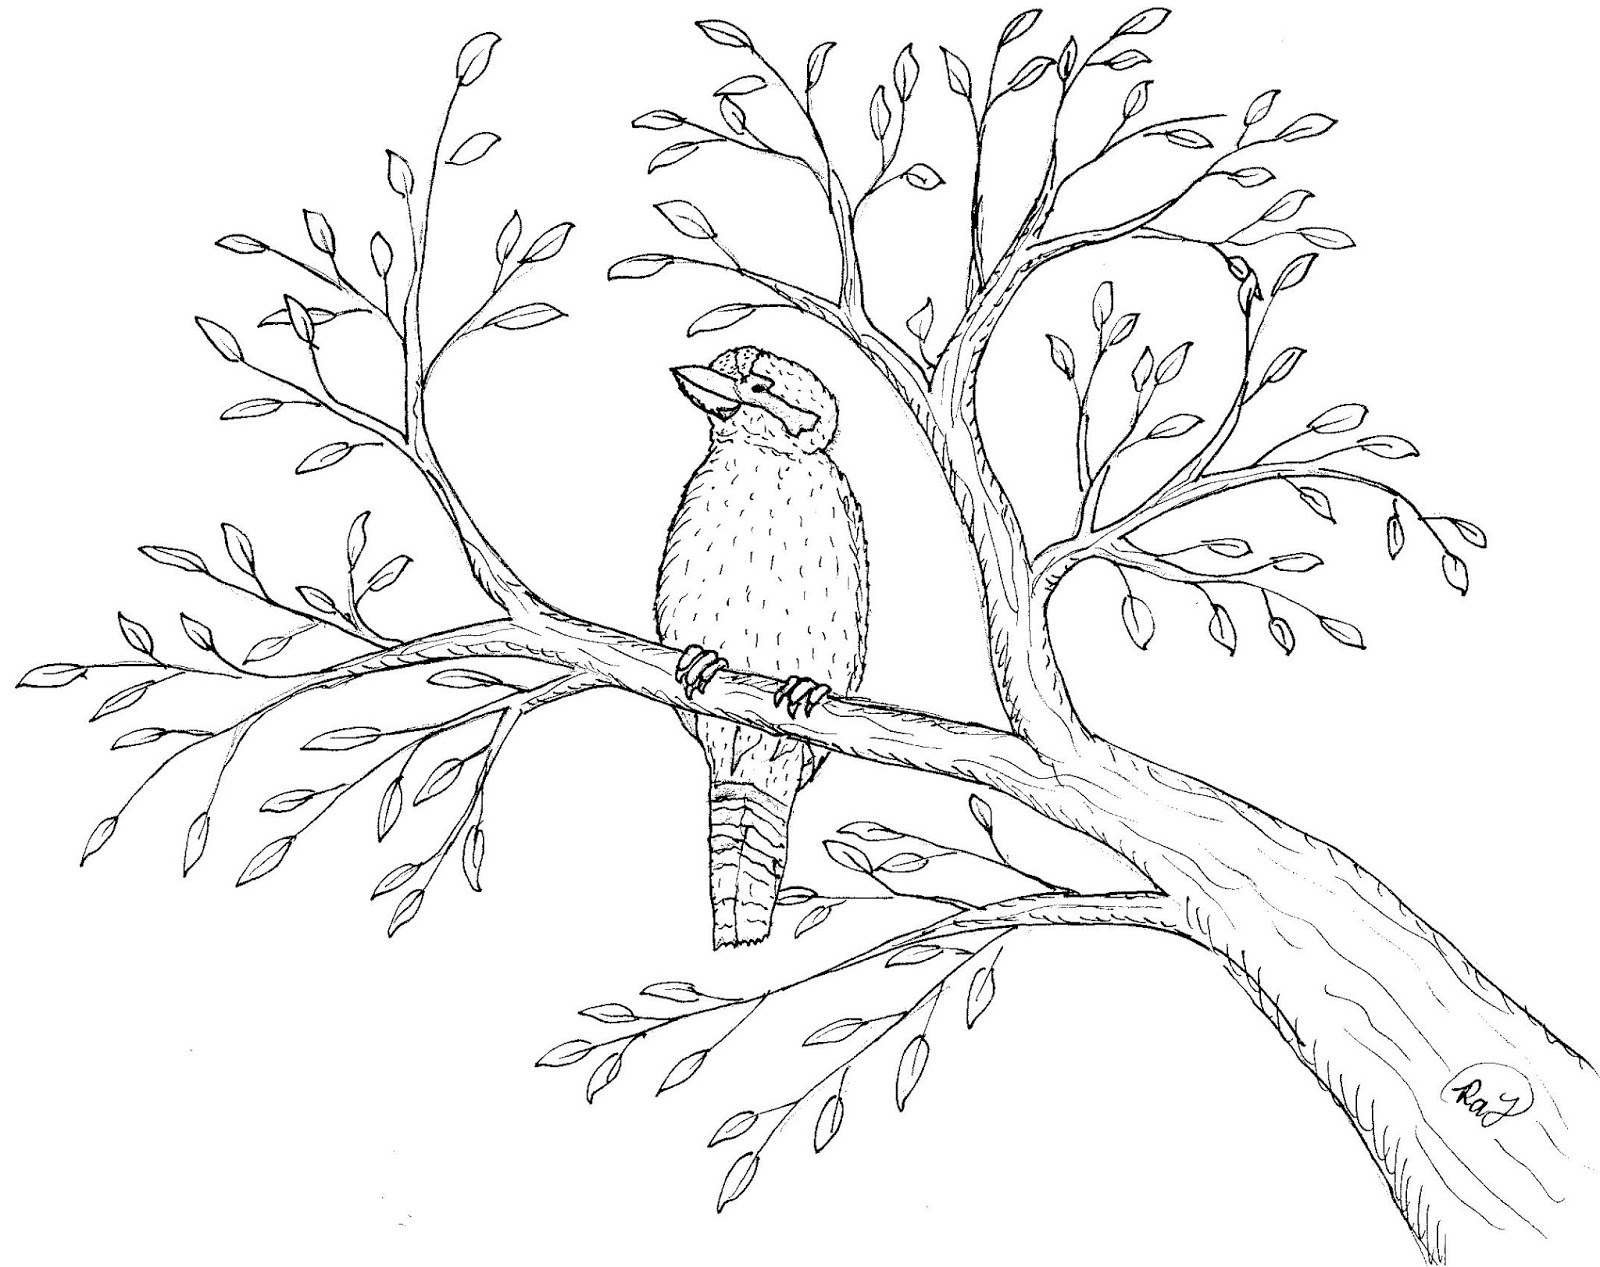 Robin's Great Coloring Pages: Kookaburra in Gum Tree